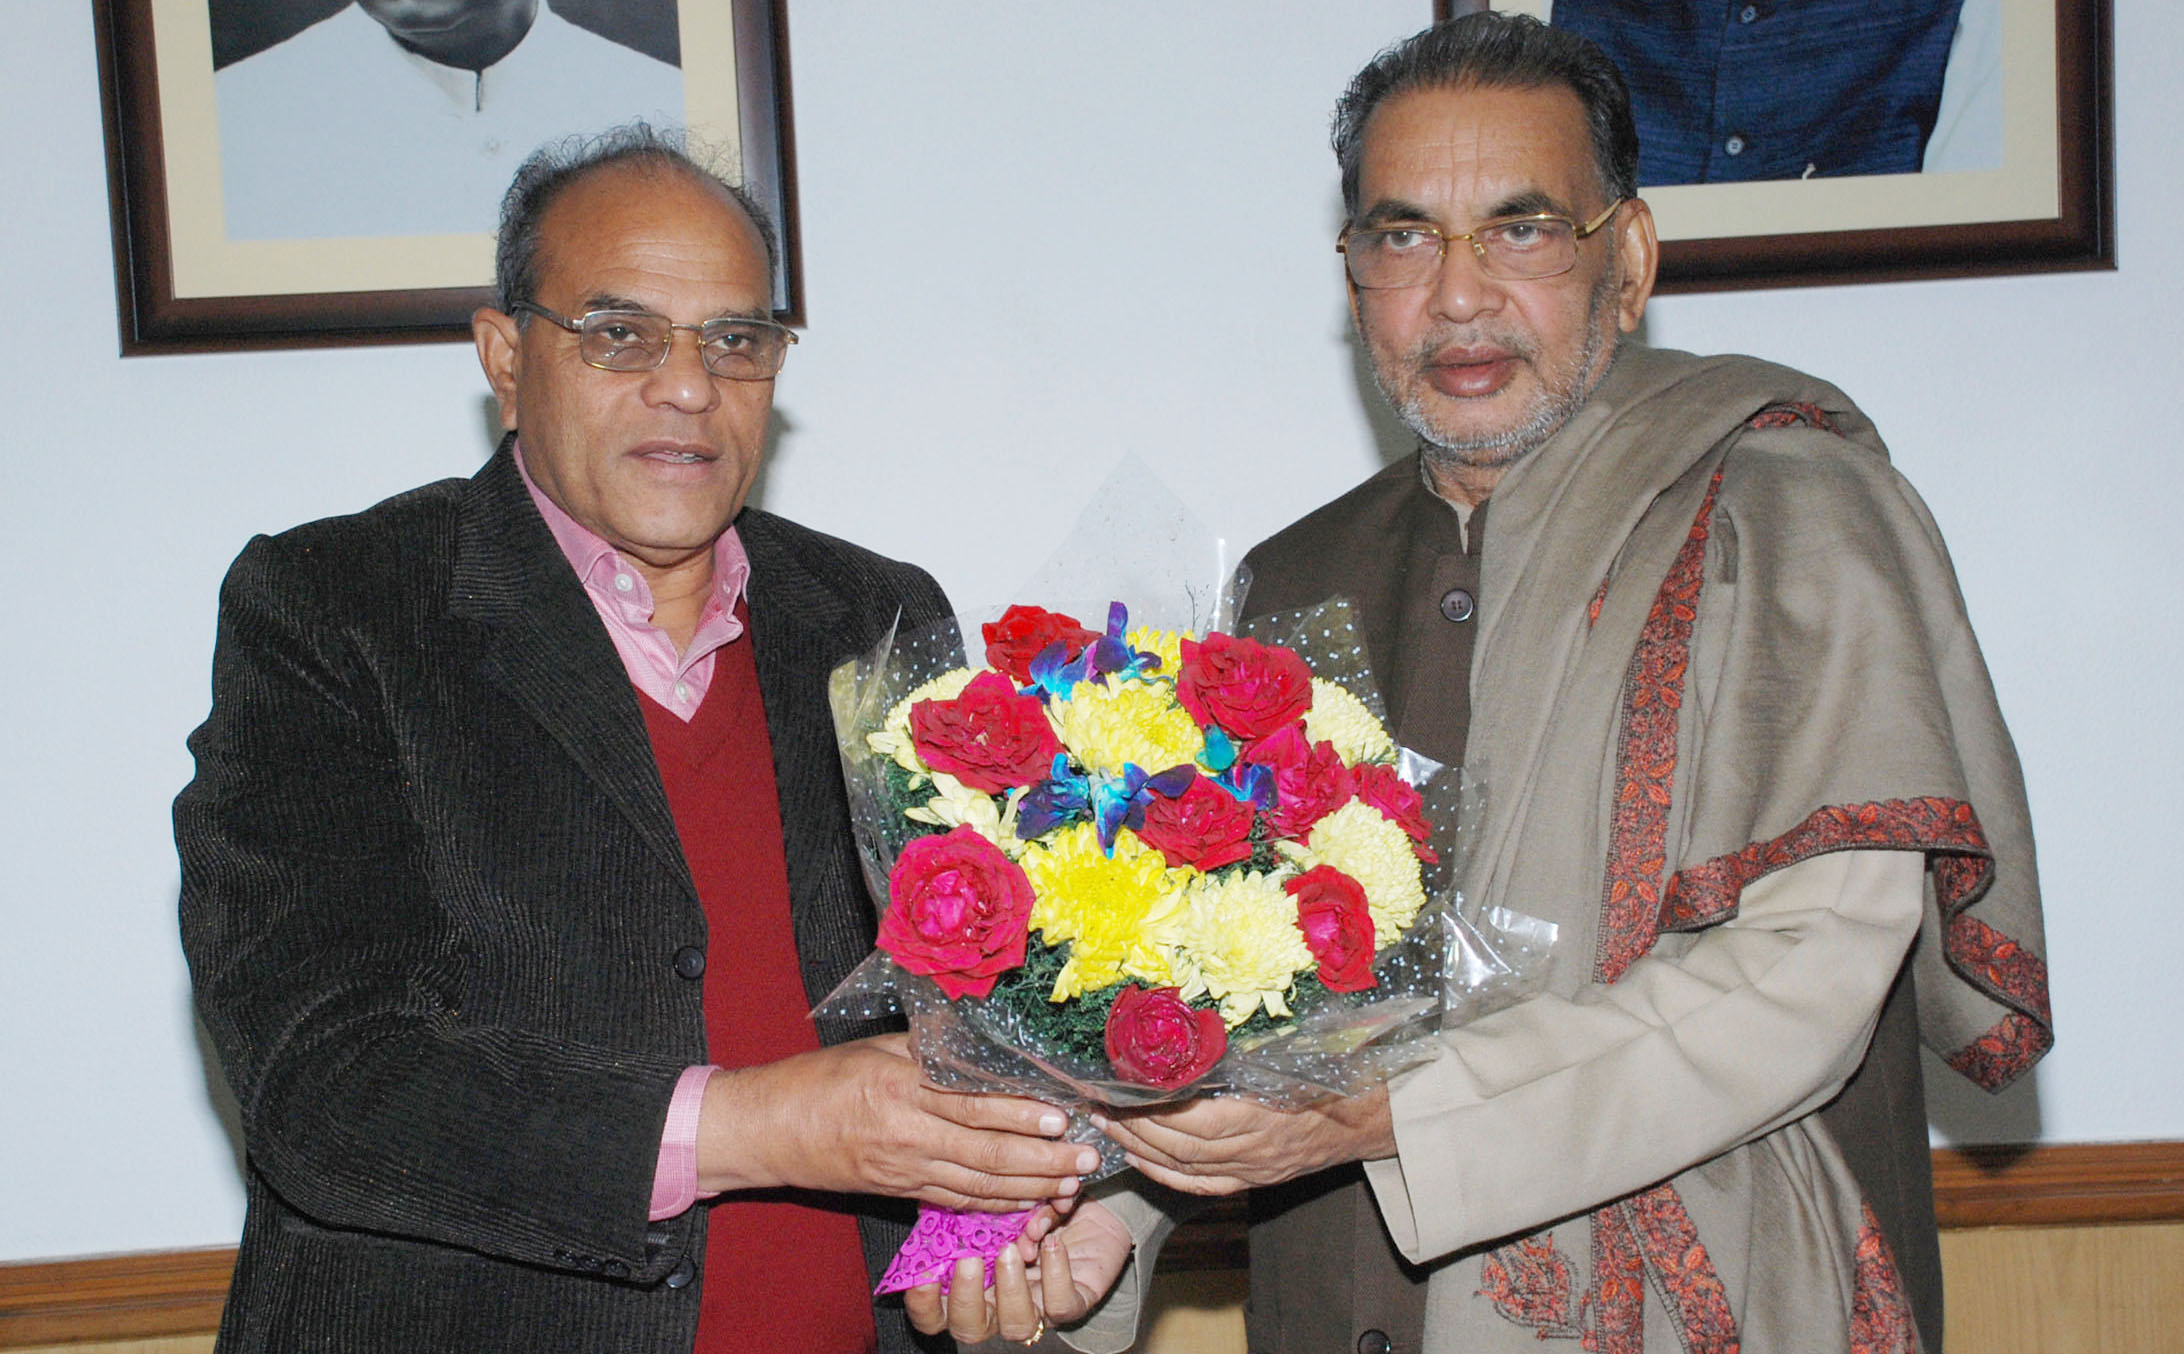 Agriculture Minister of MP, Gauri Shankar Bisen meeting the Union Minister Radha Mohan Singh,